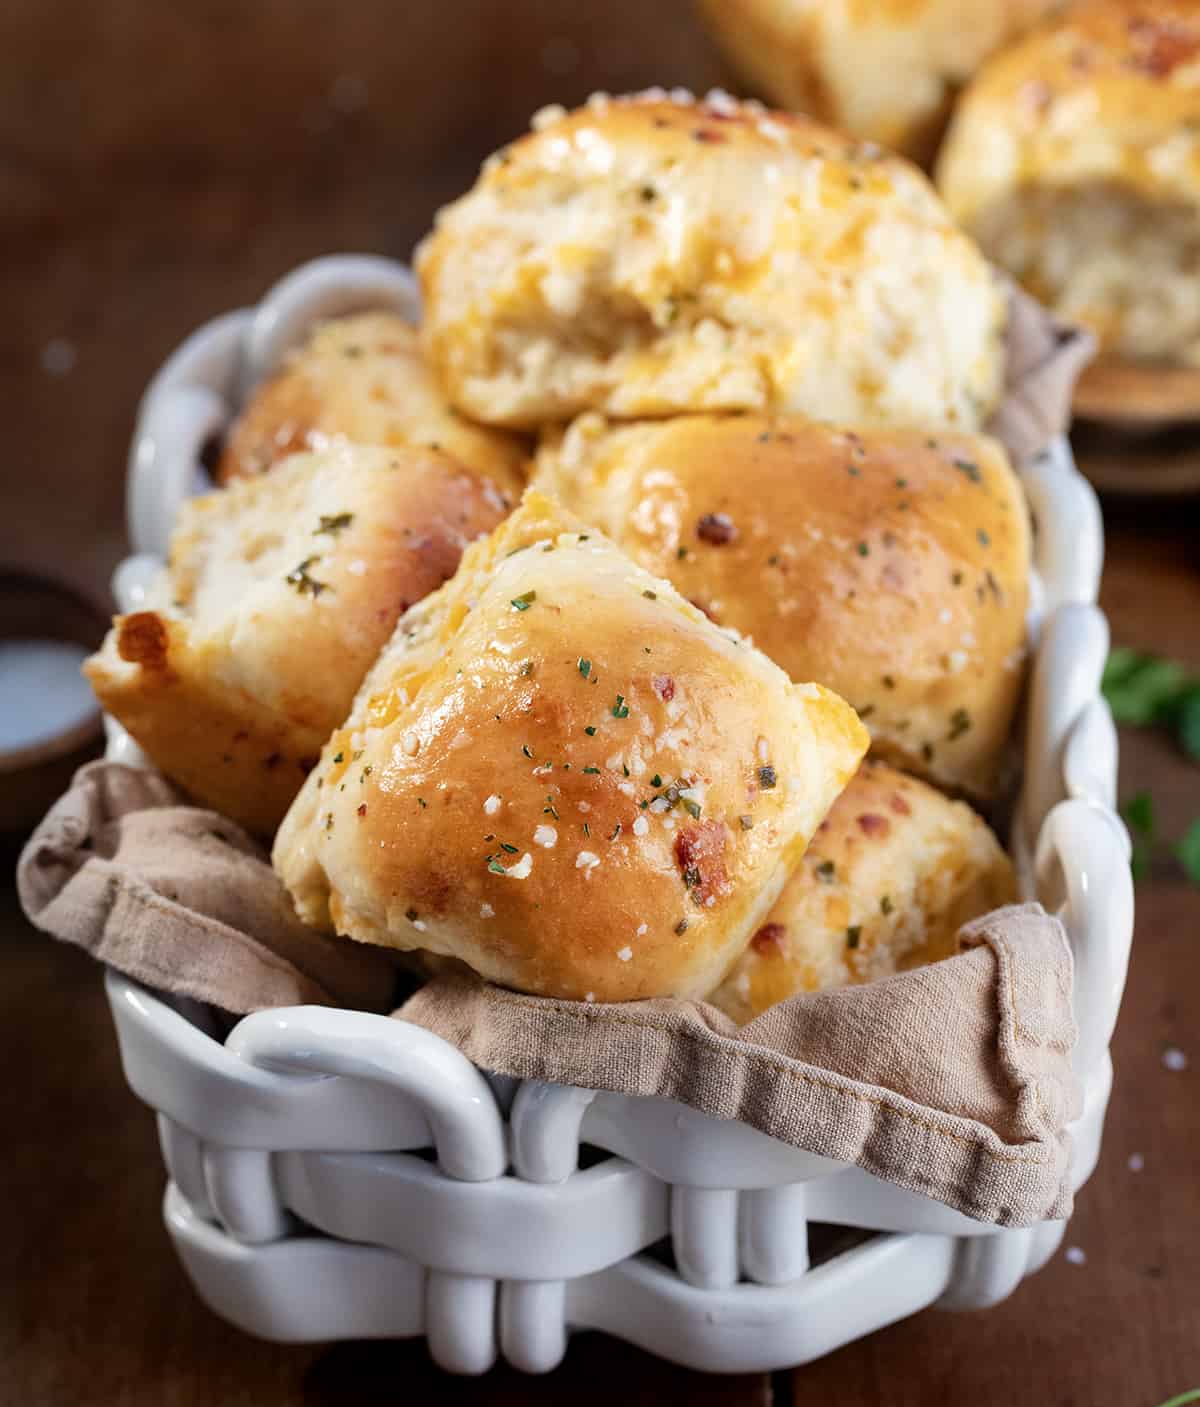 Cheesy Garlic Dinner Rolls in a basket on a wooden table.